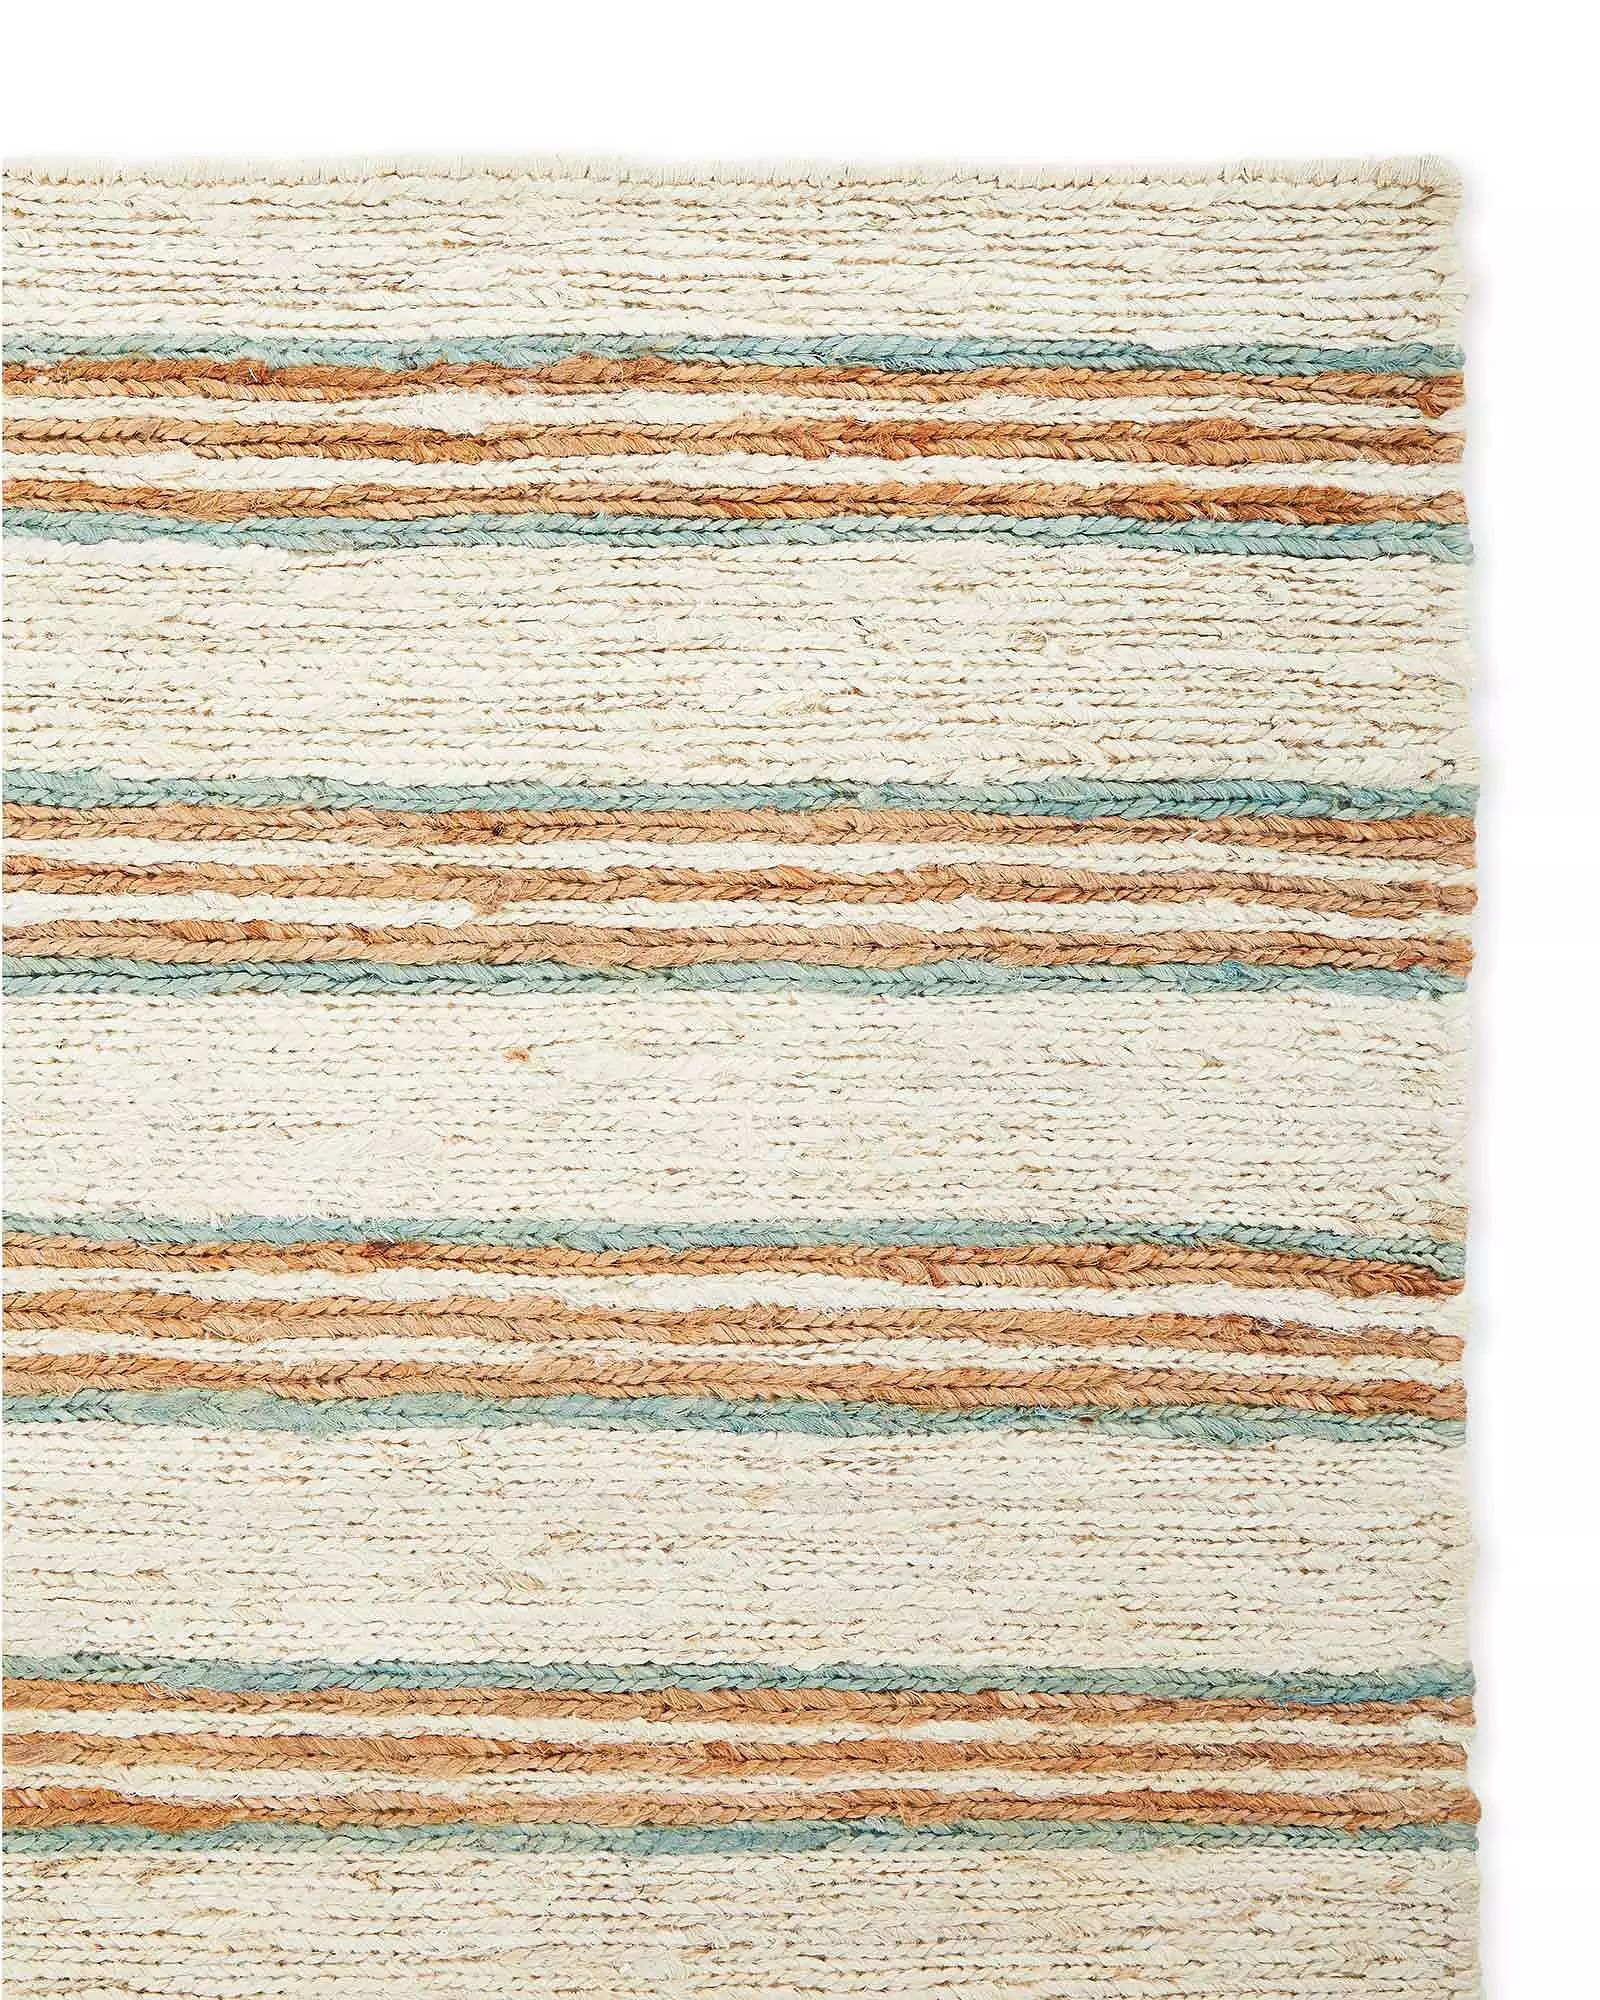 Boardwalk Rug | Serena and Lily